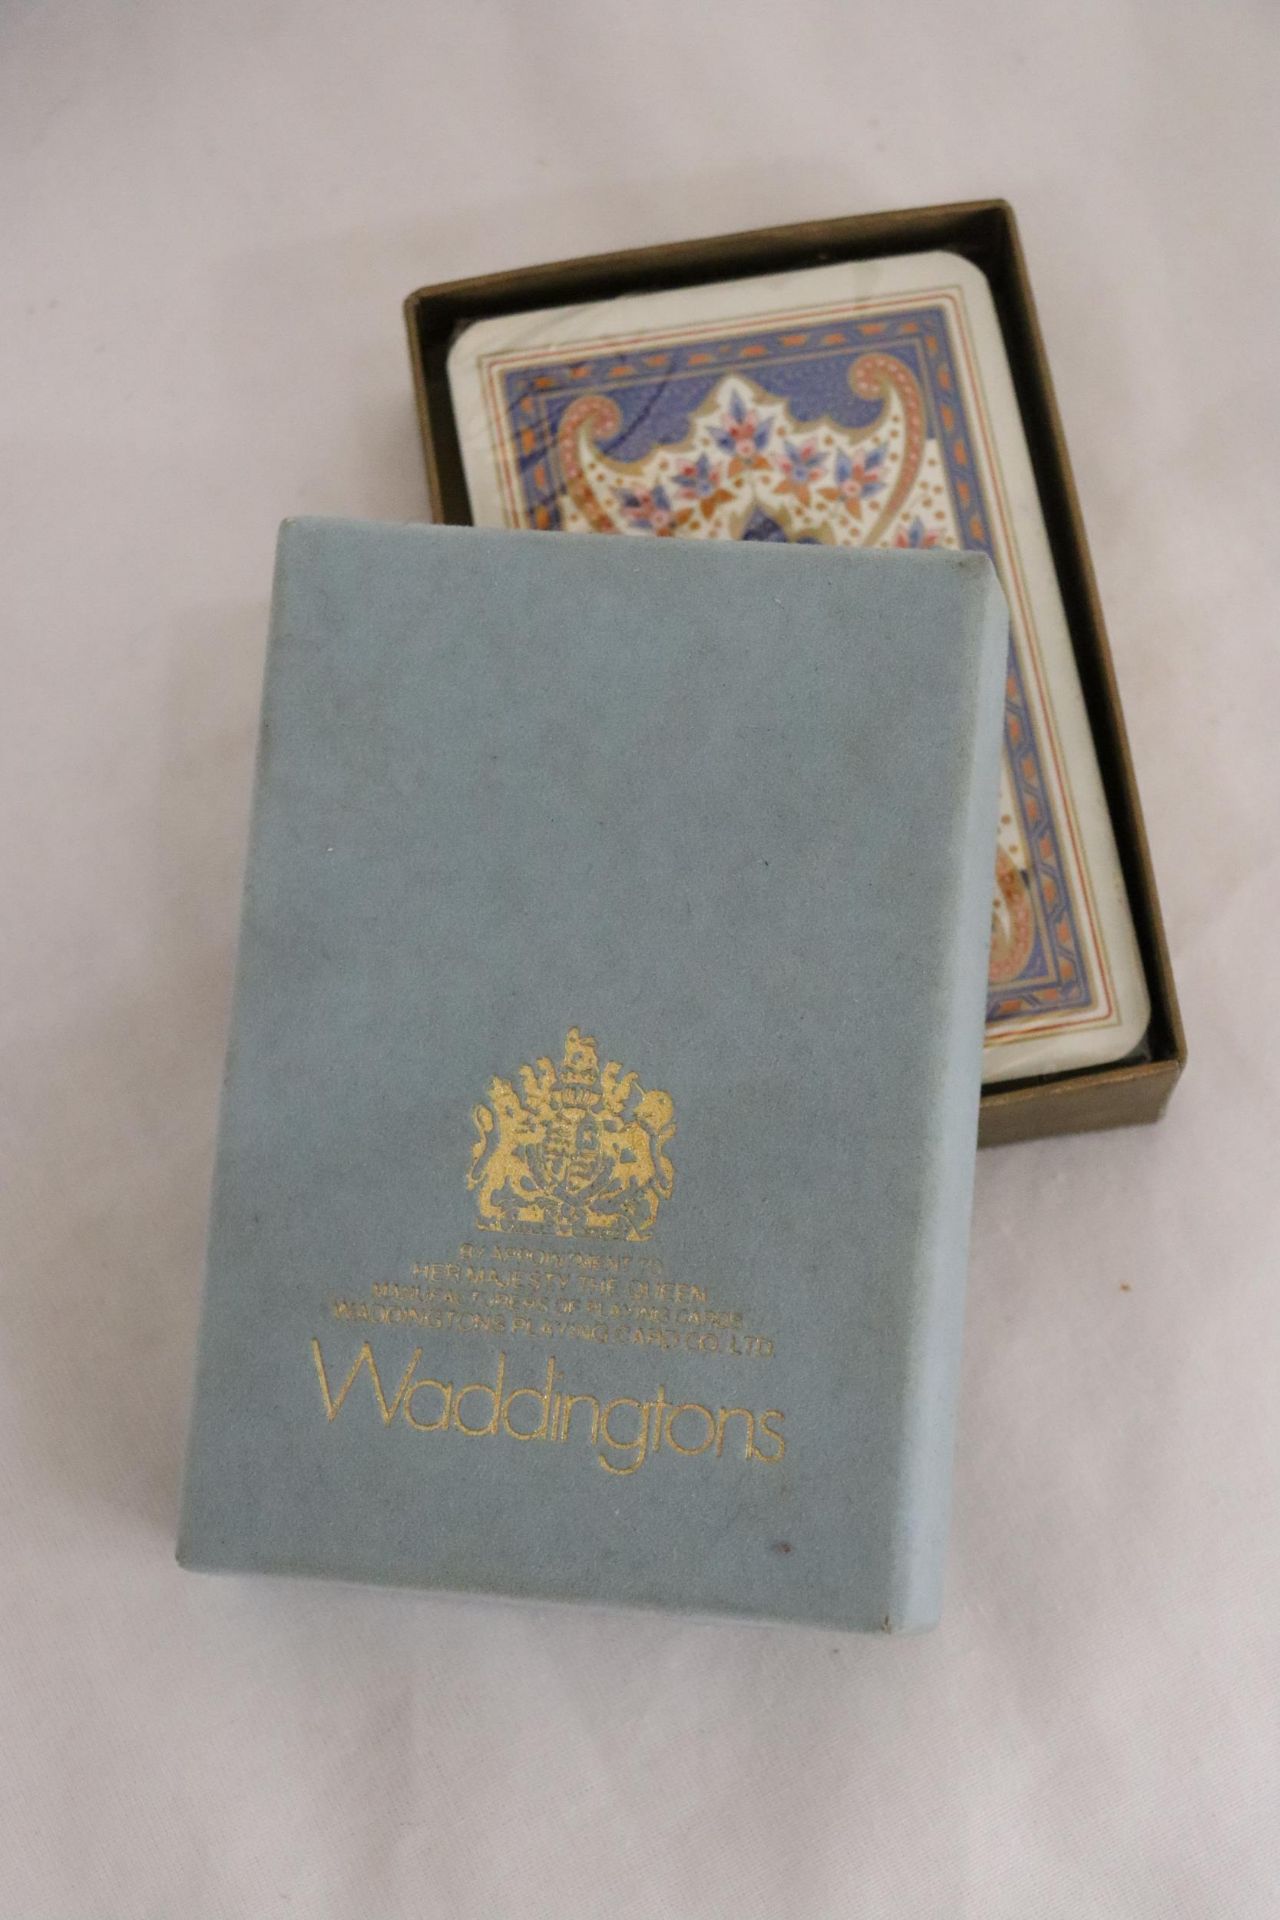 A WADDINGTONS WEDGWOOD JASPER CARD TRAY WITH PLAYING CARDS - Image 5 of 5